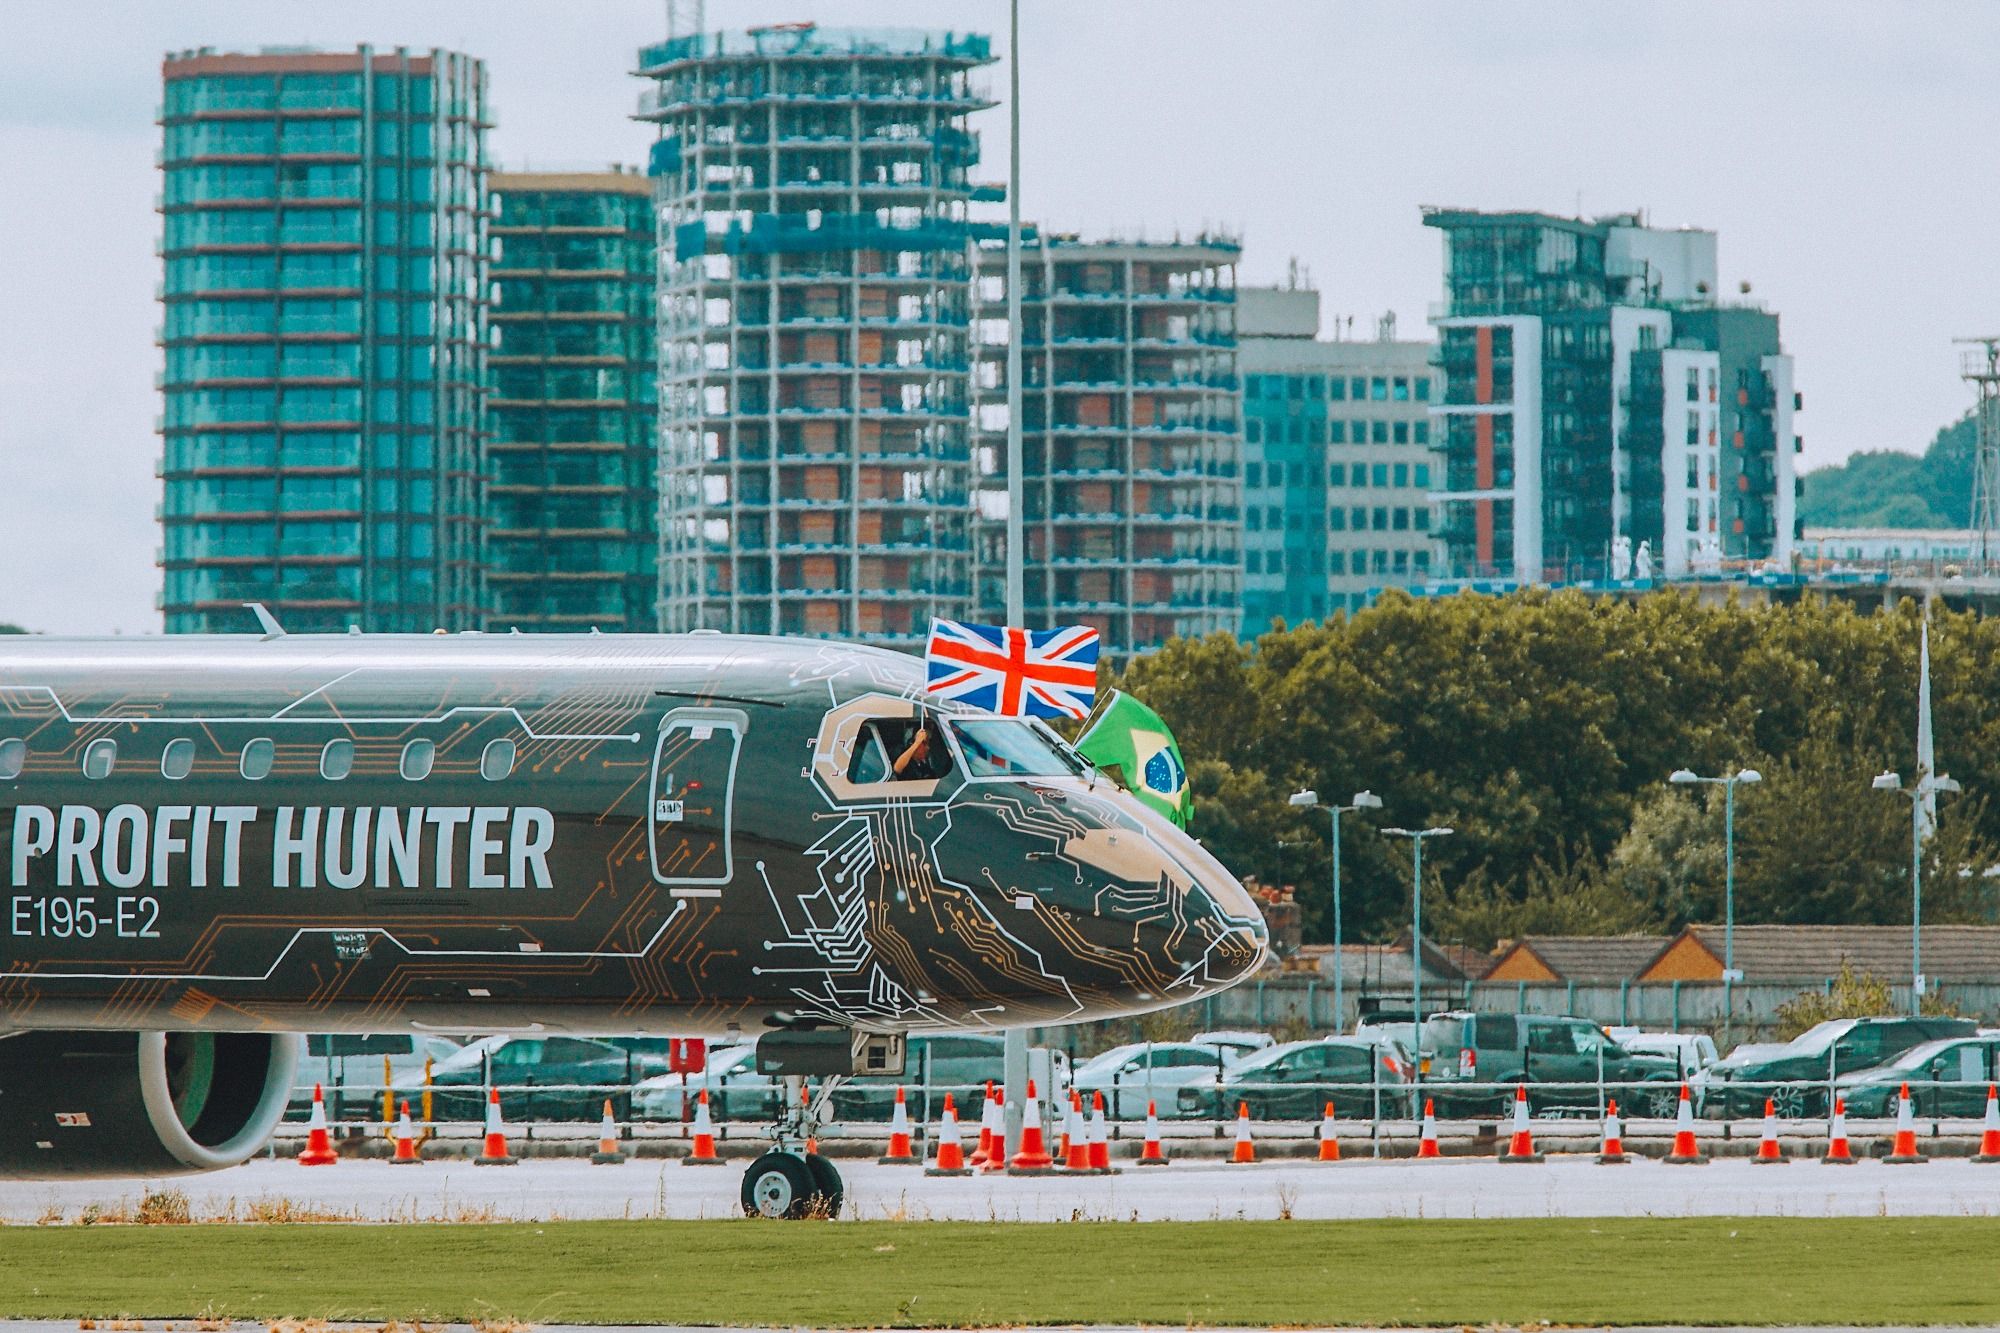 Embraer E195-E2 first landing at LCY